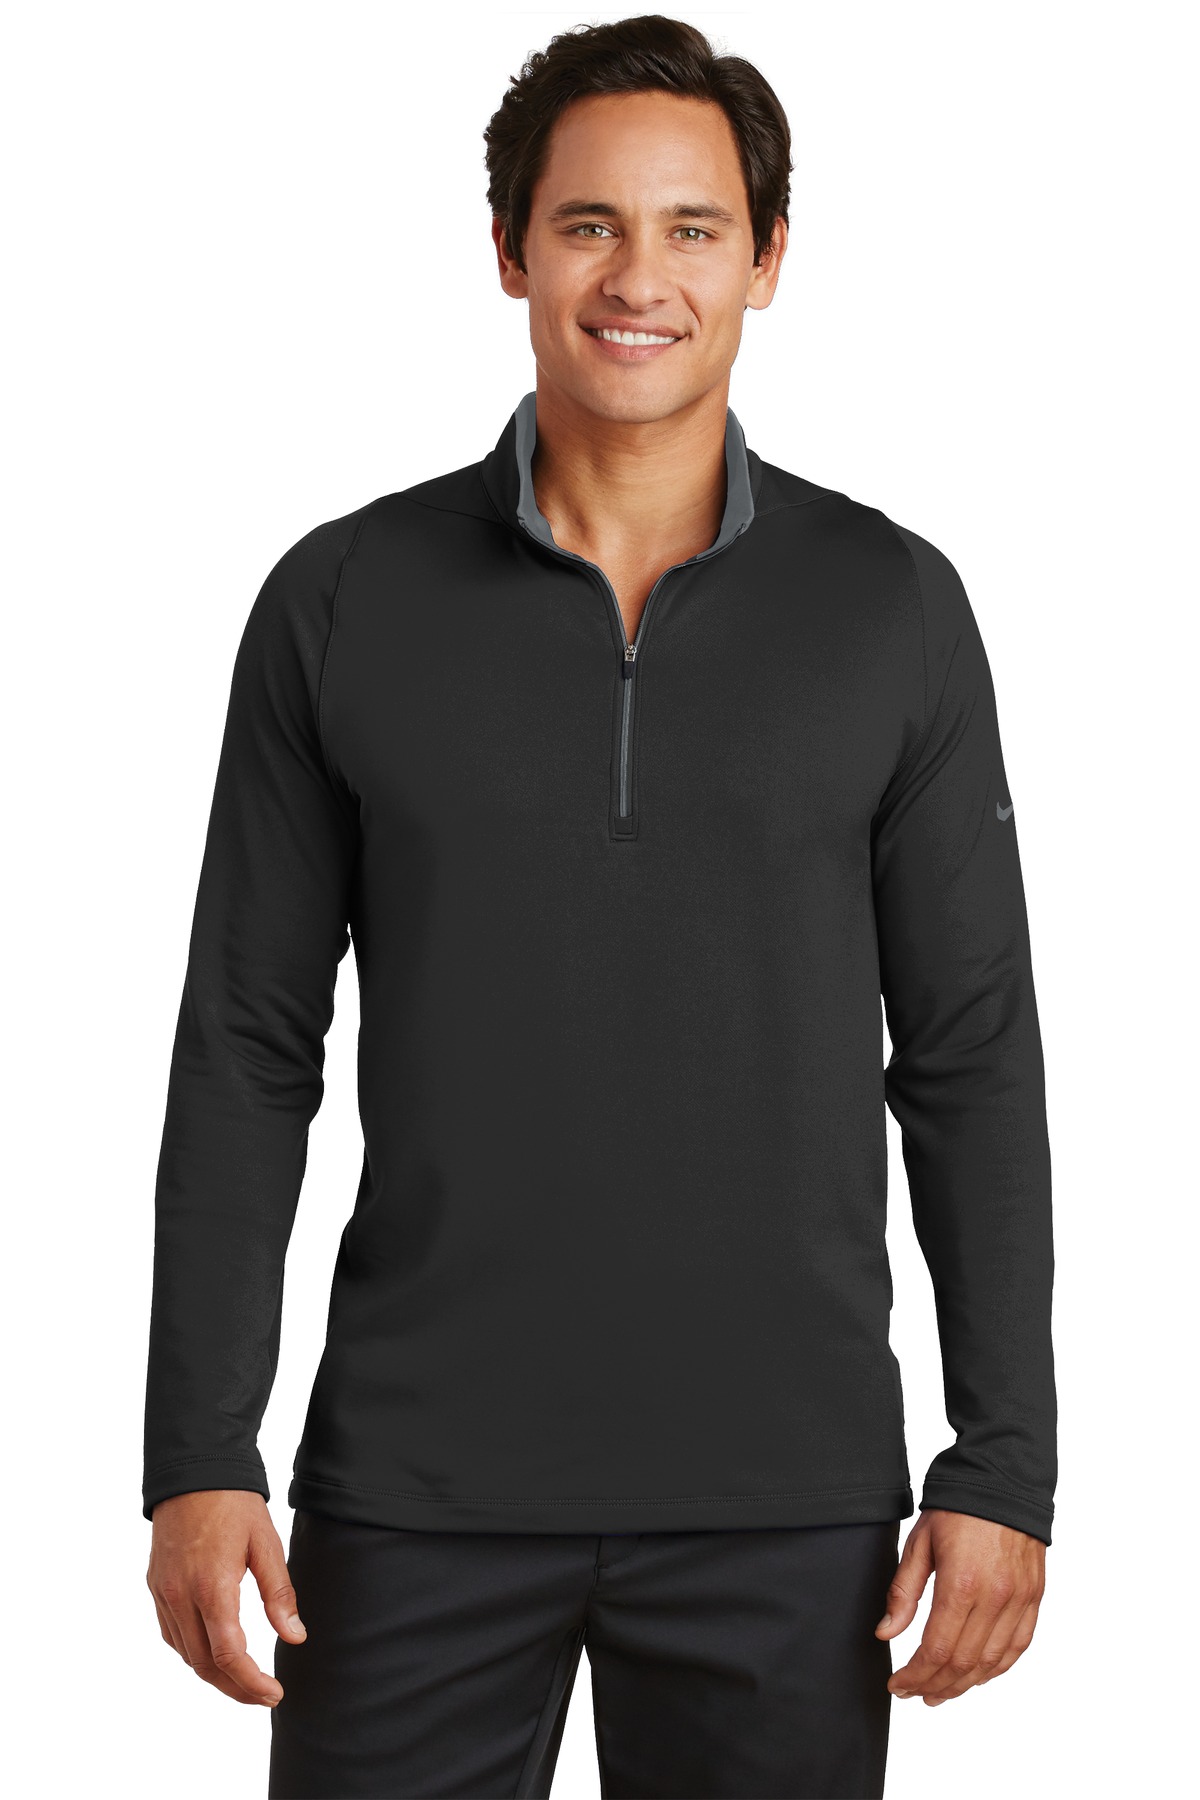 Nike Outerwear, Sweat shirts & Fleece for Hospitality Dri-FIT Stretch 1/2-Zip Cover-Up.-Nike